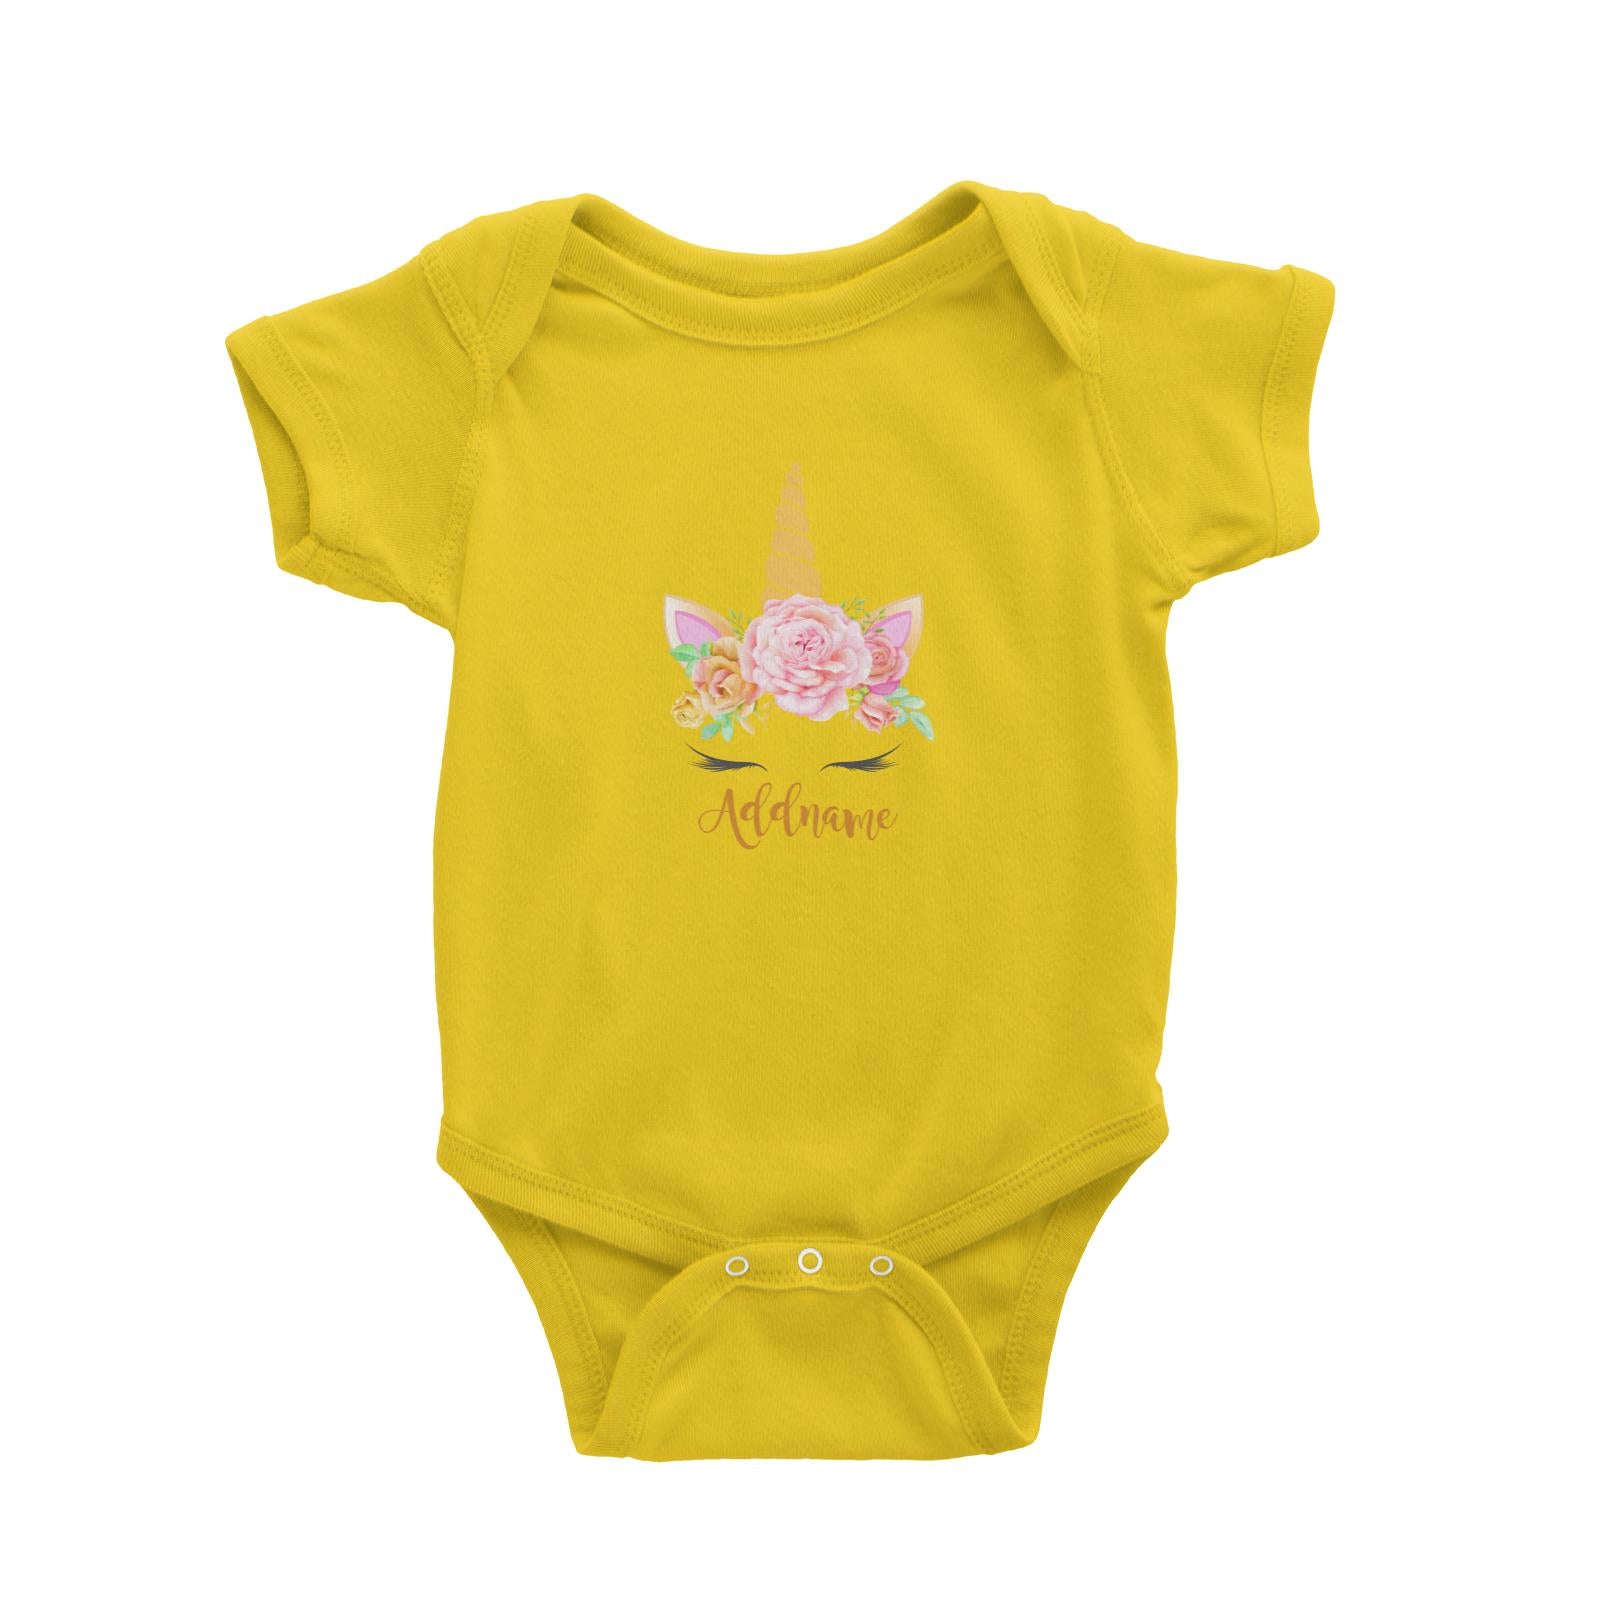 Sweet Rose Garland Unicorn Face Addname Baby Romper